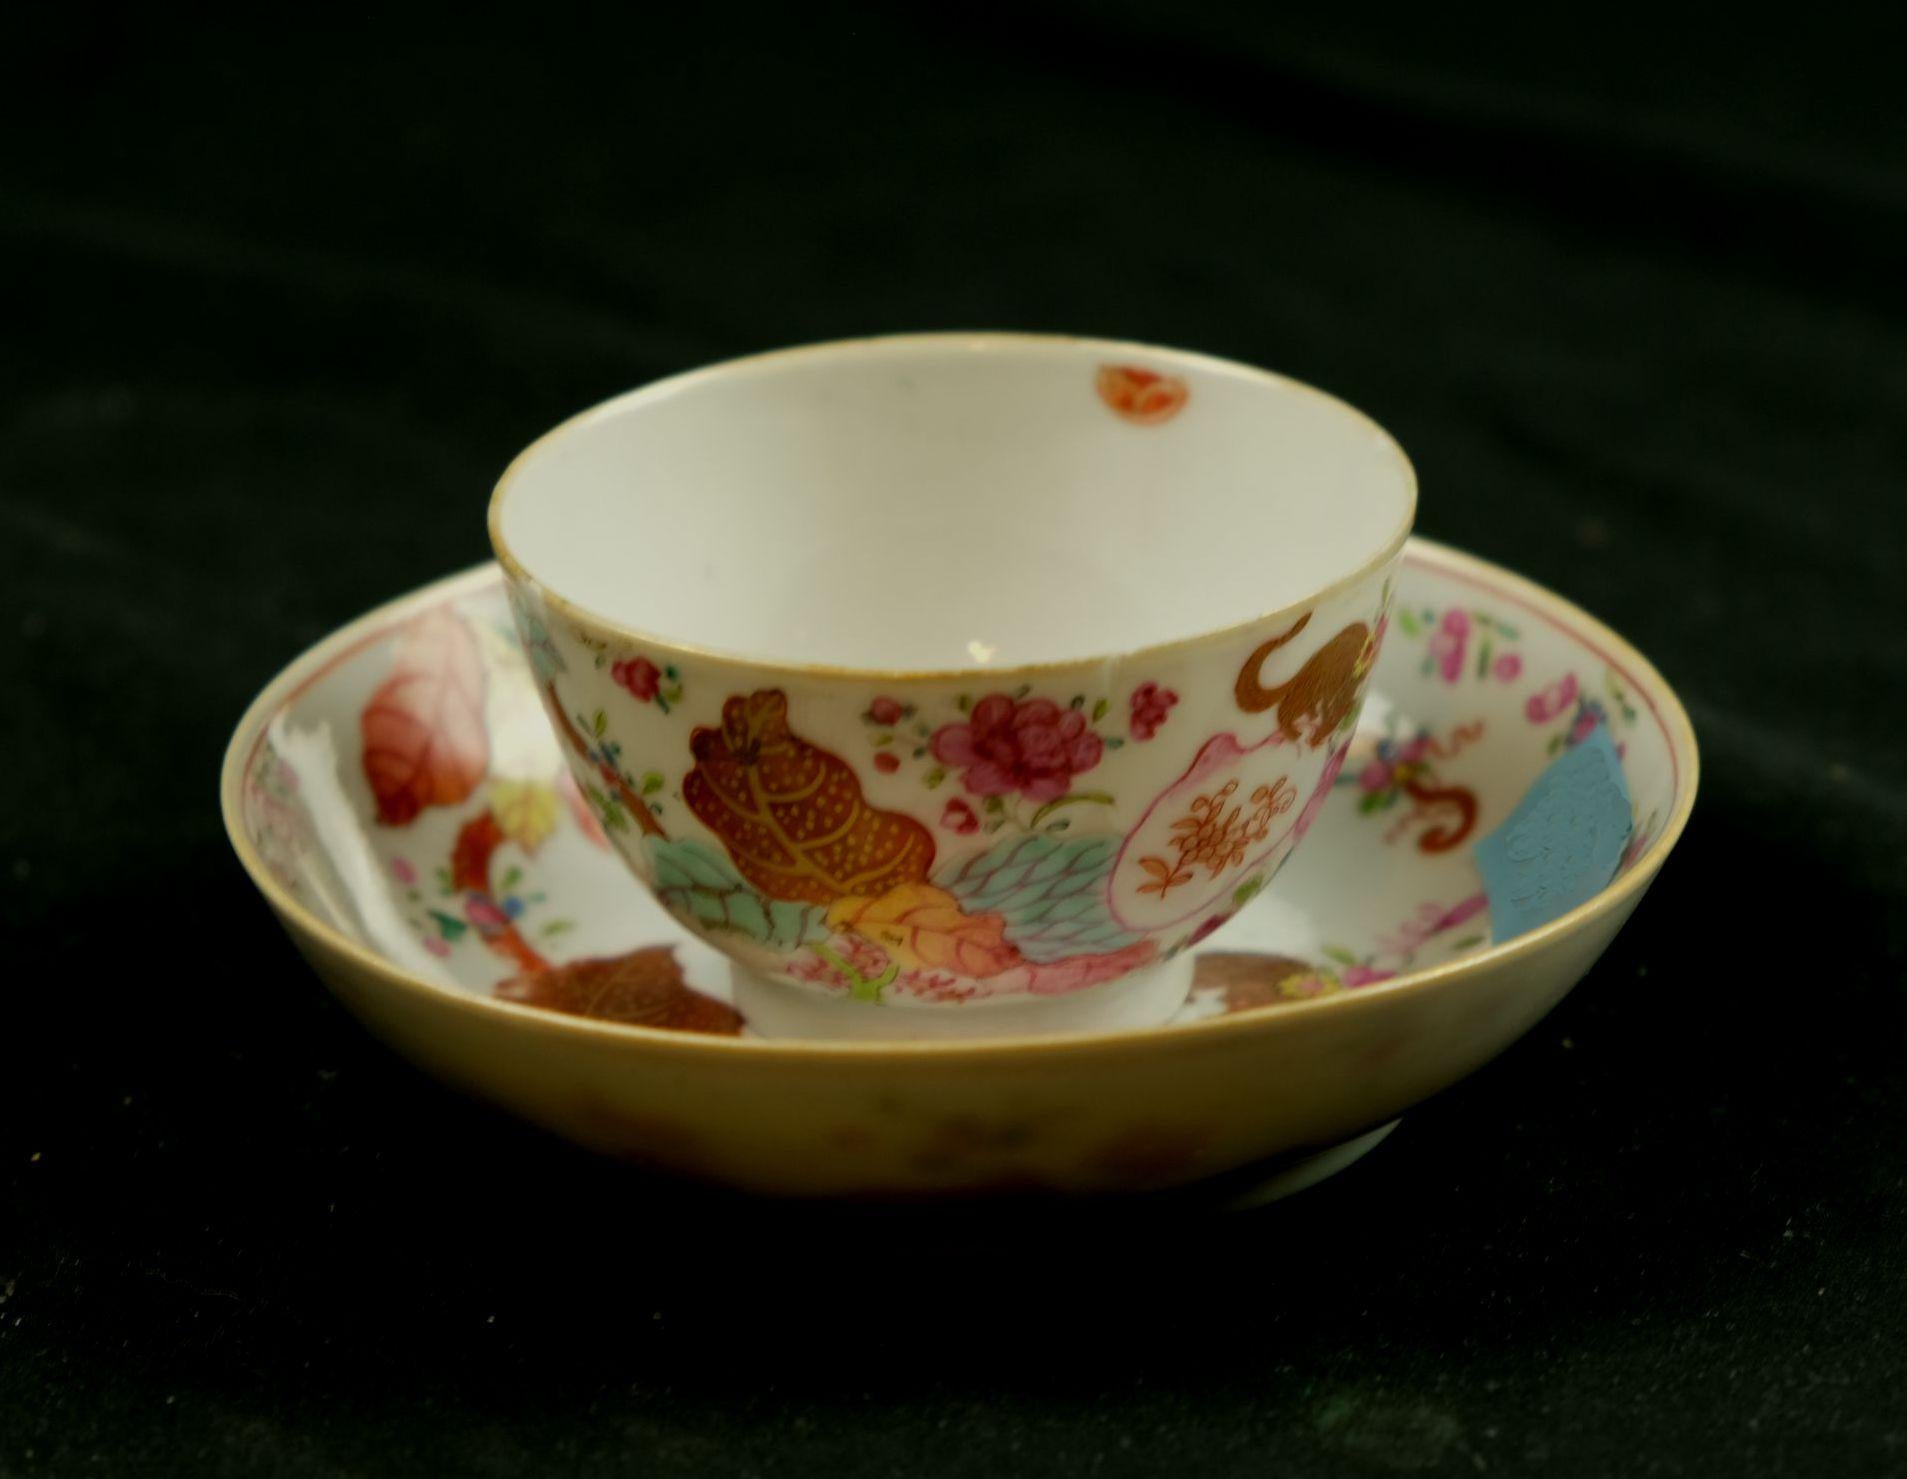 Fine quality Chinese antique tobacco leaves, double-handled Cup & Saucer Porcelain, one of the most prized of Chinese Export patterns, in 18TH CENTURY. Circa 1760-70; strong vivid overglaze Famille Rose enamels, with gilt accents,.
Size: Bawl: 2